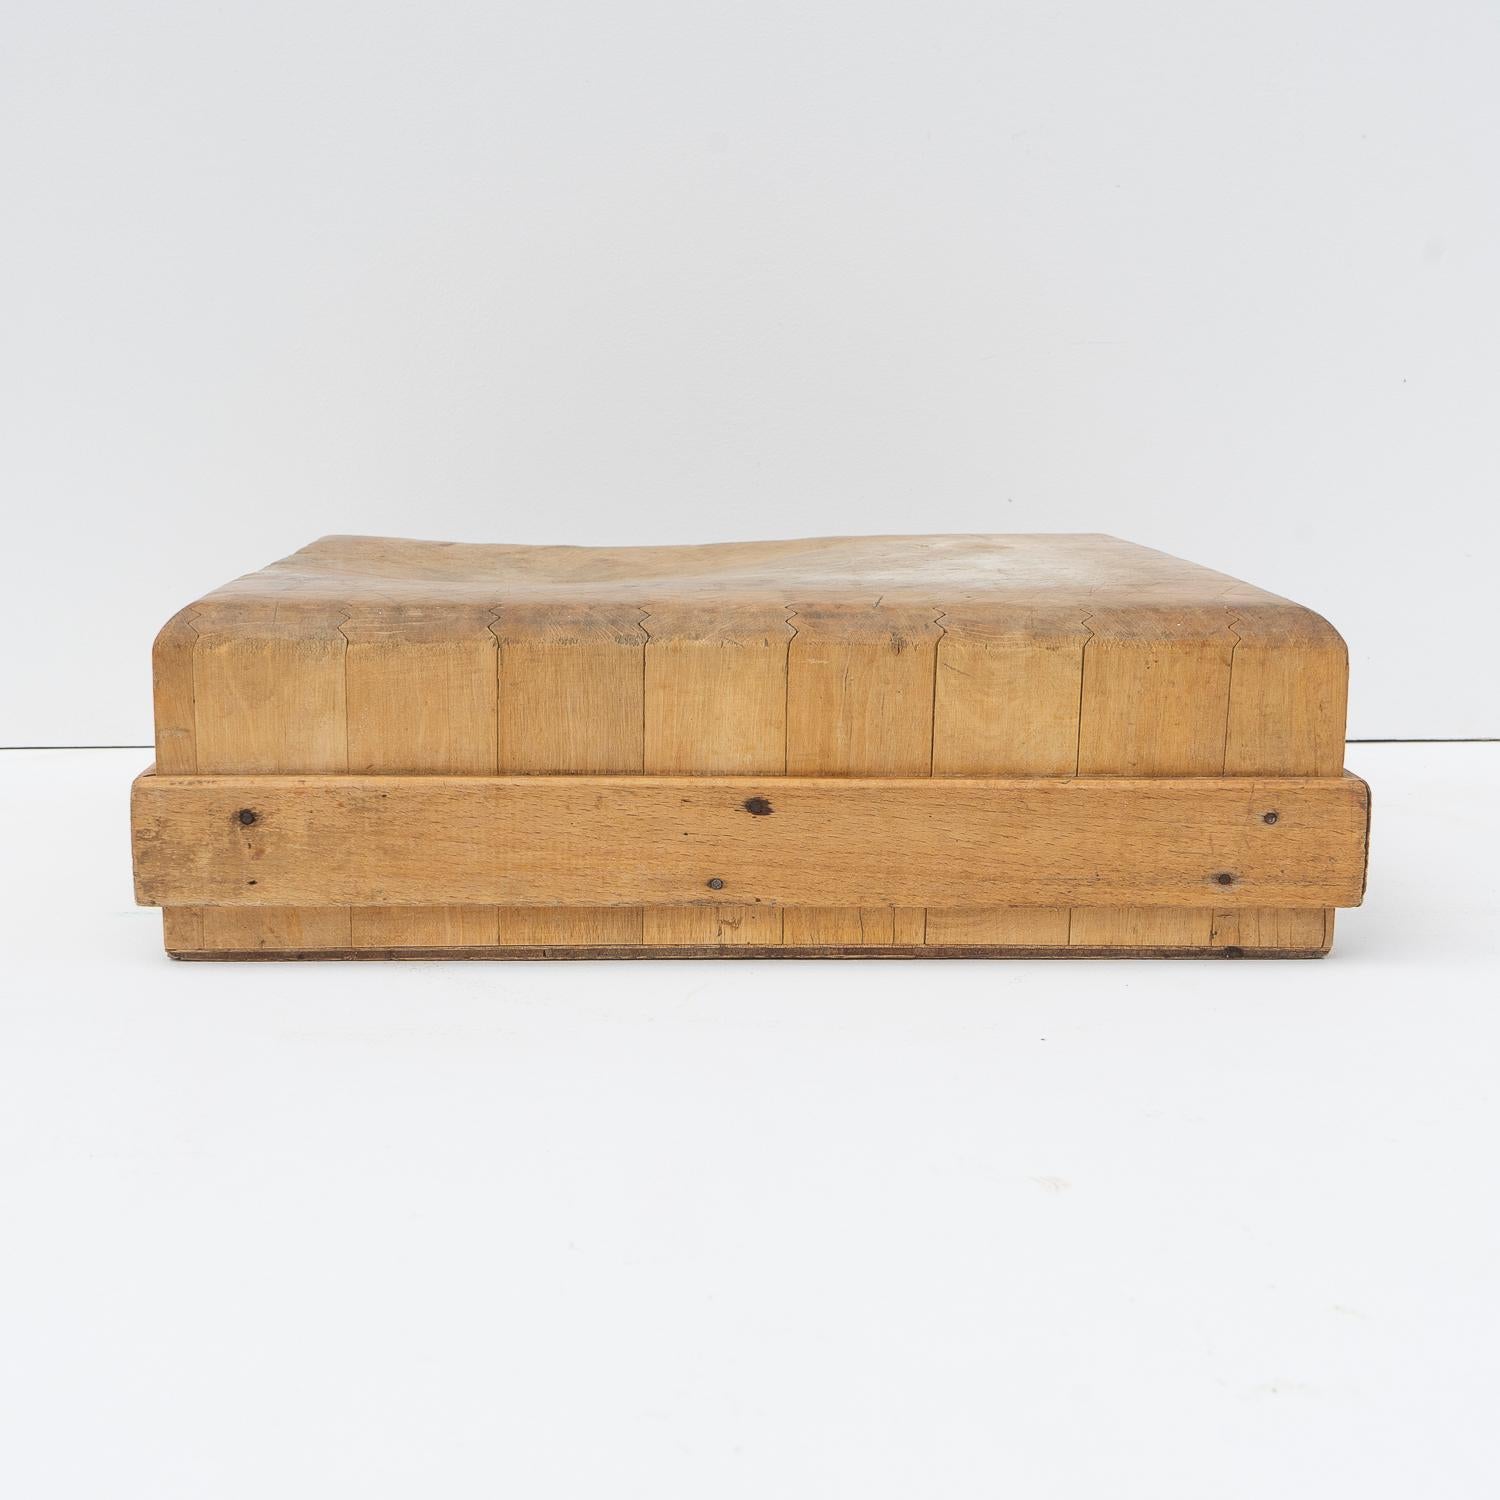 Vintage Wooden End Grain Butchers Block Chopping Board, Early-Mid 20th Century 5